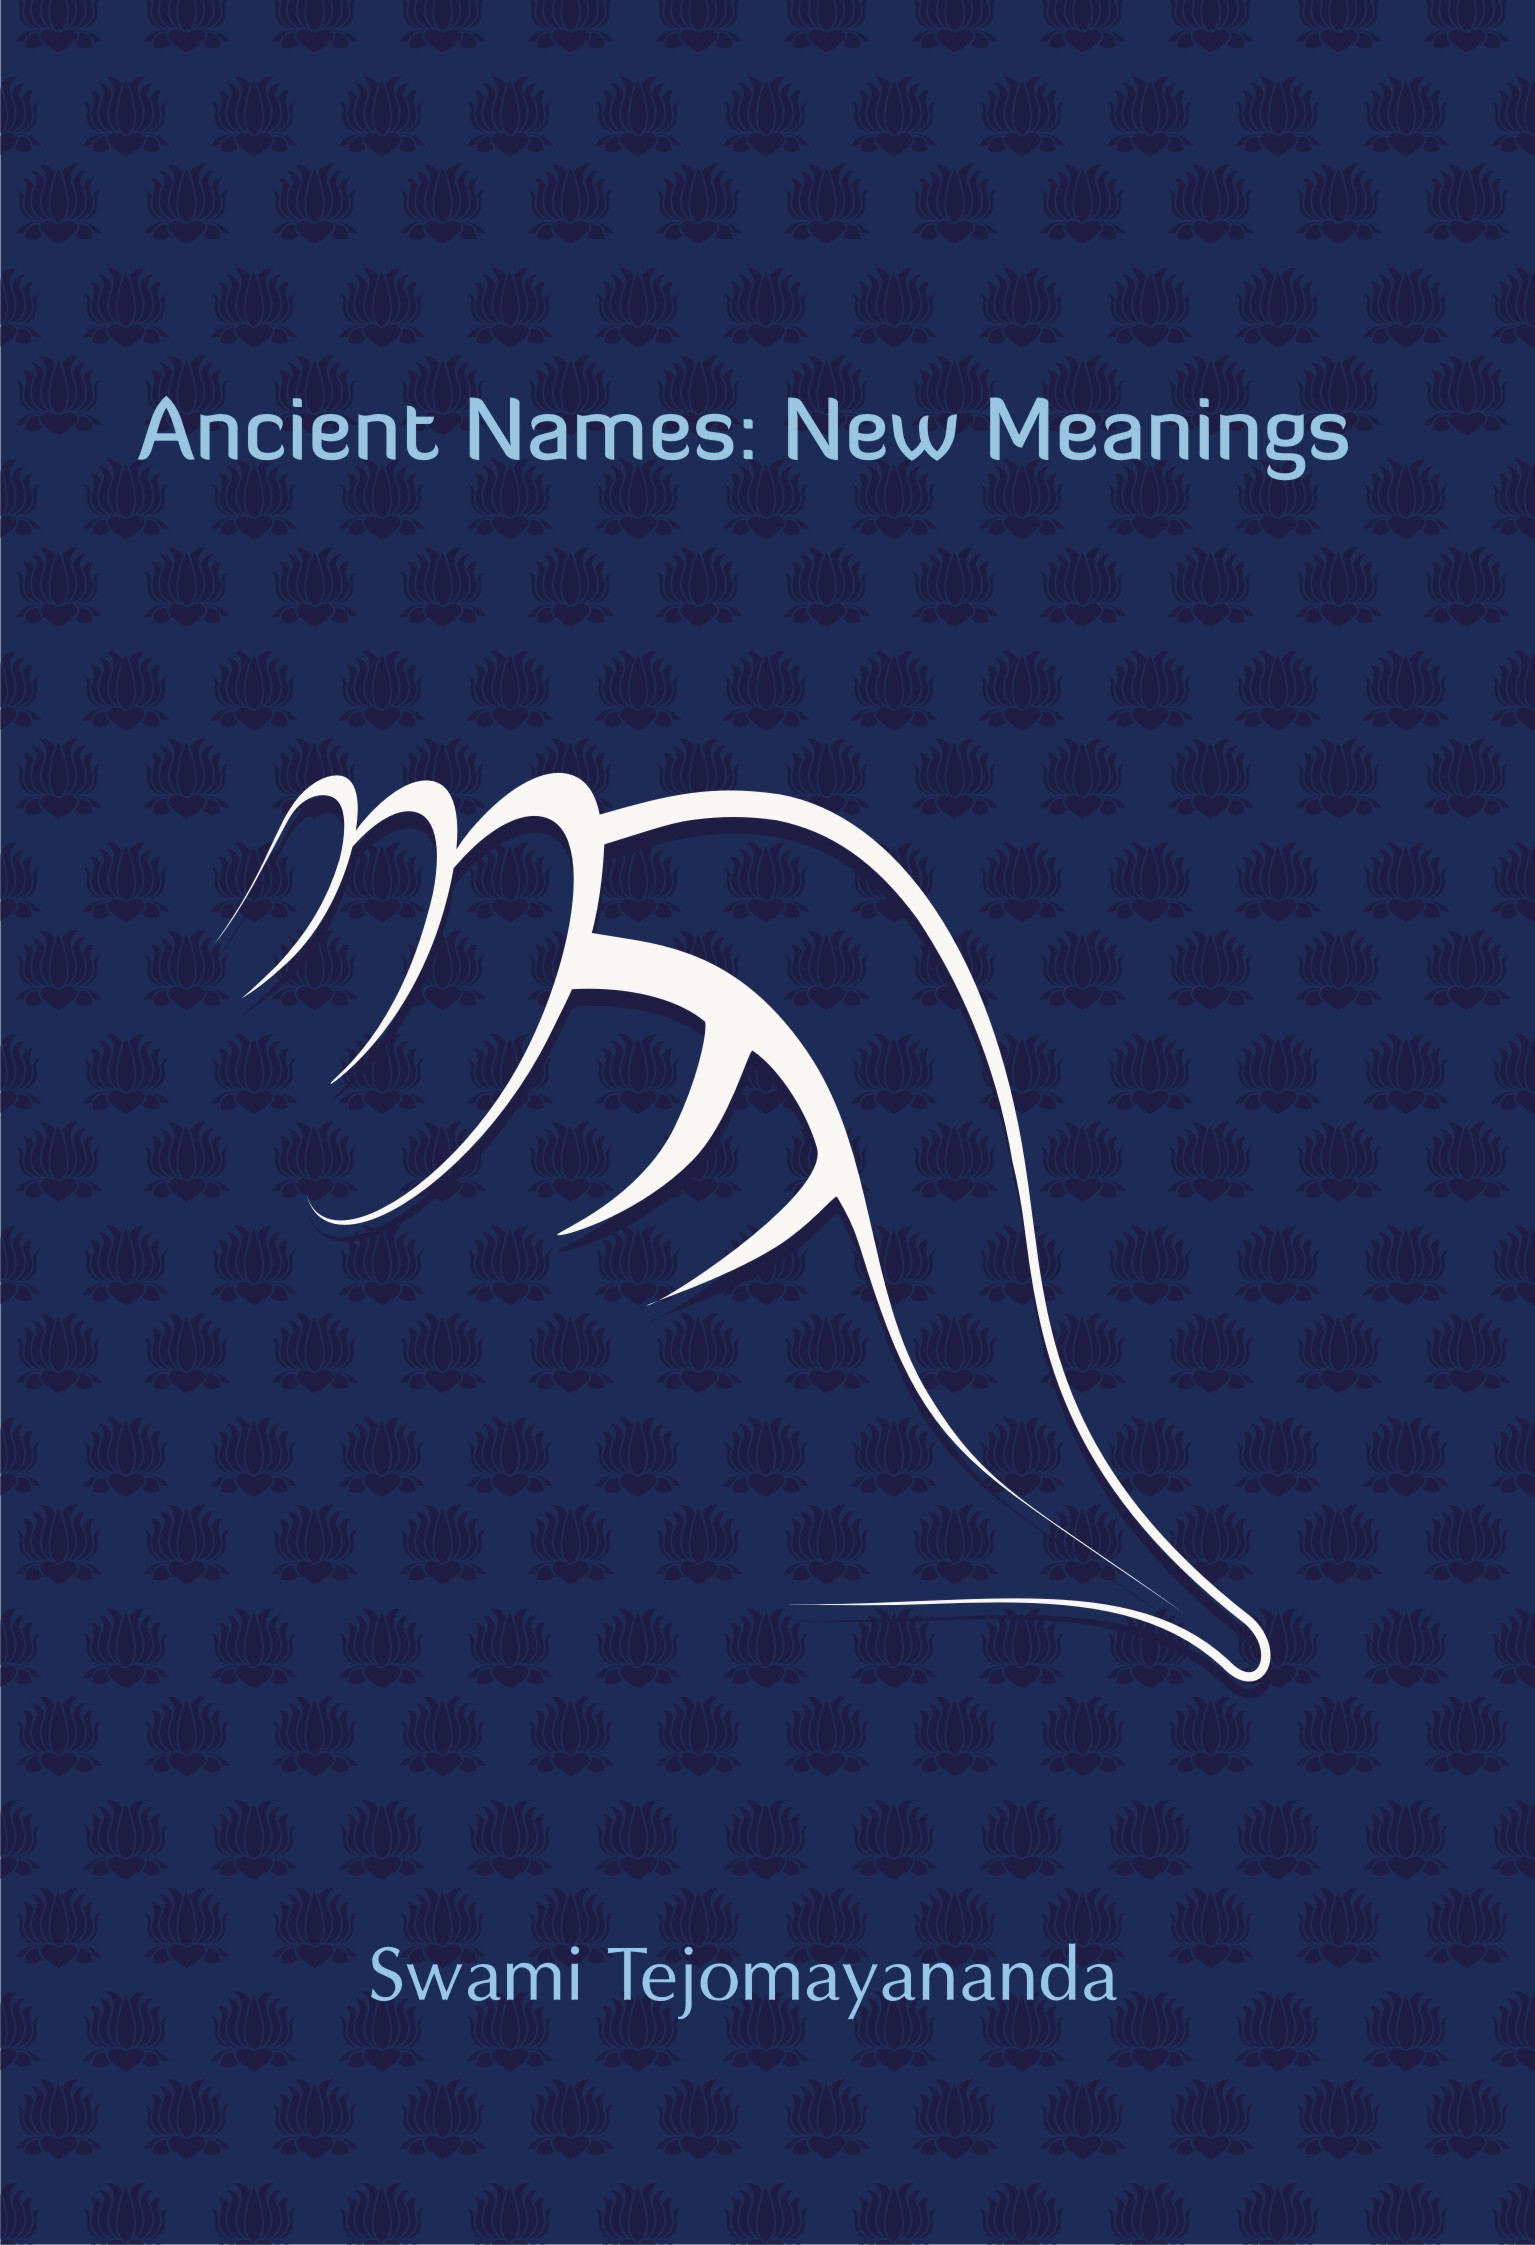 Ancient Names: New Meanings